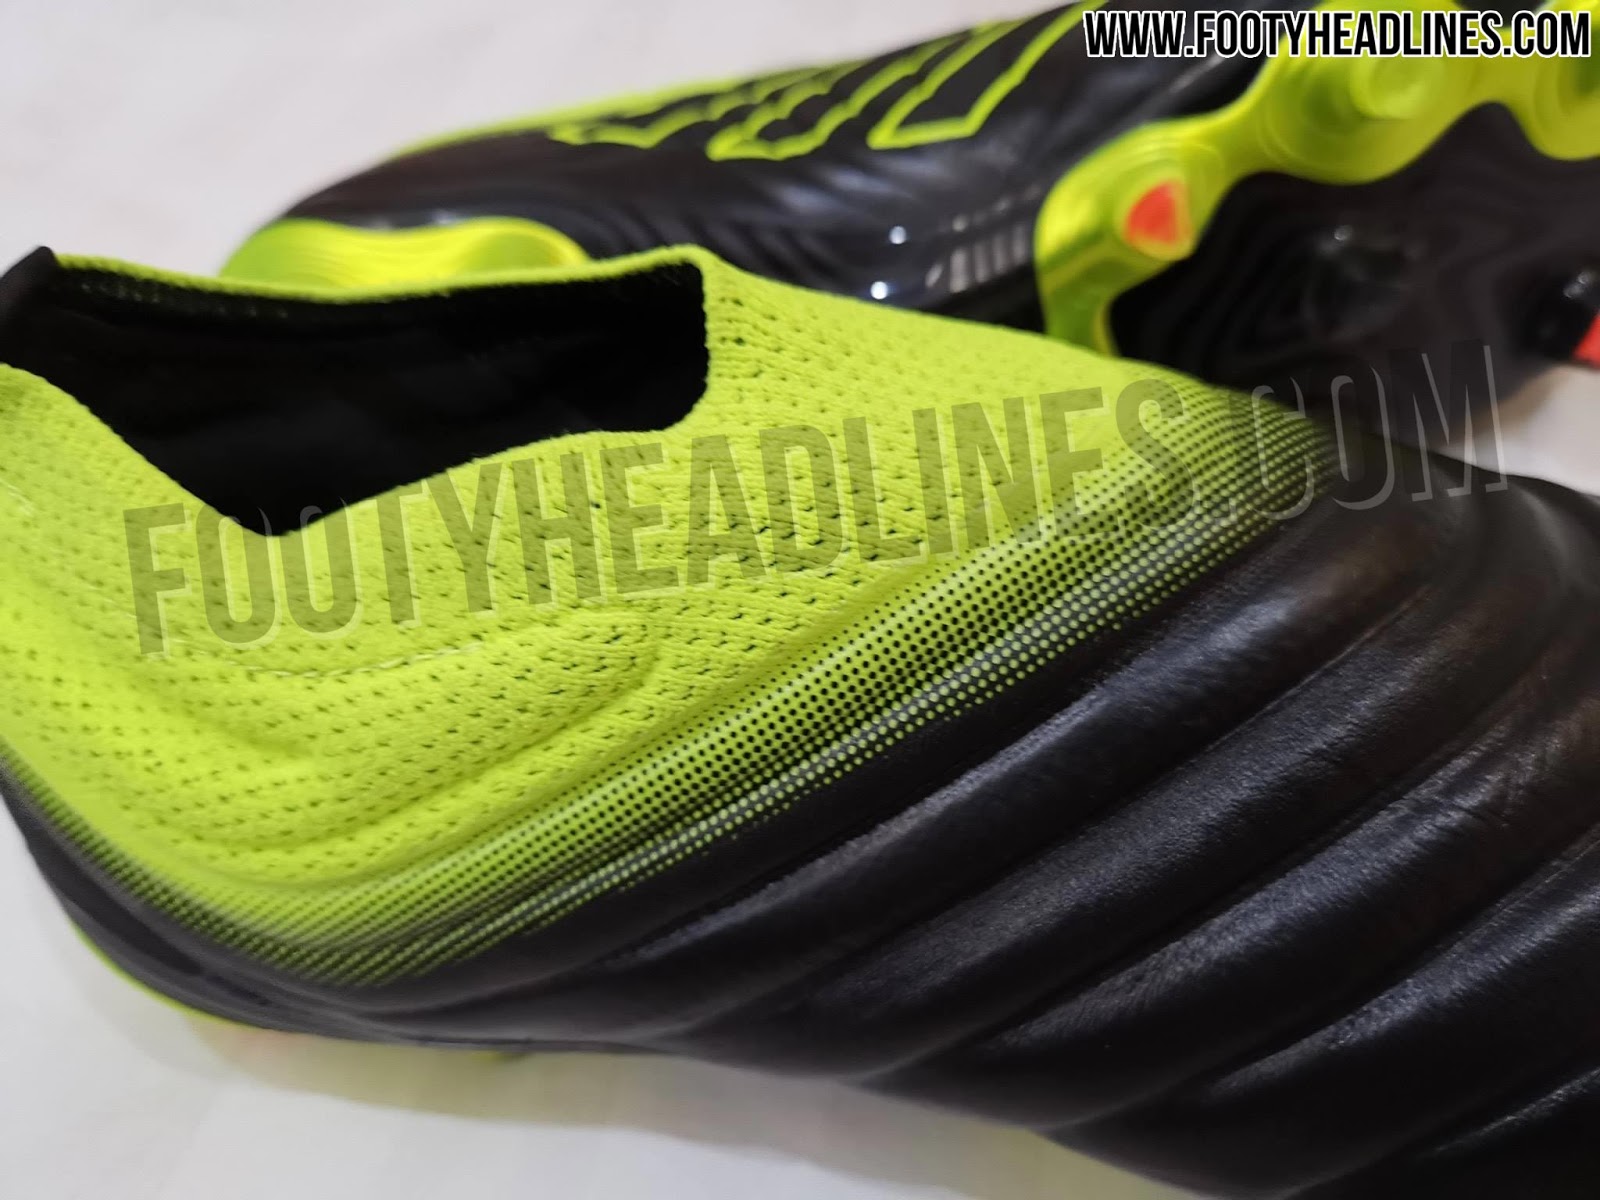 Black / Yellow Laceless Adidas Copa 19+ Boots Leaked - Footy Headlines